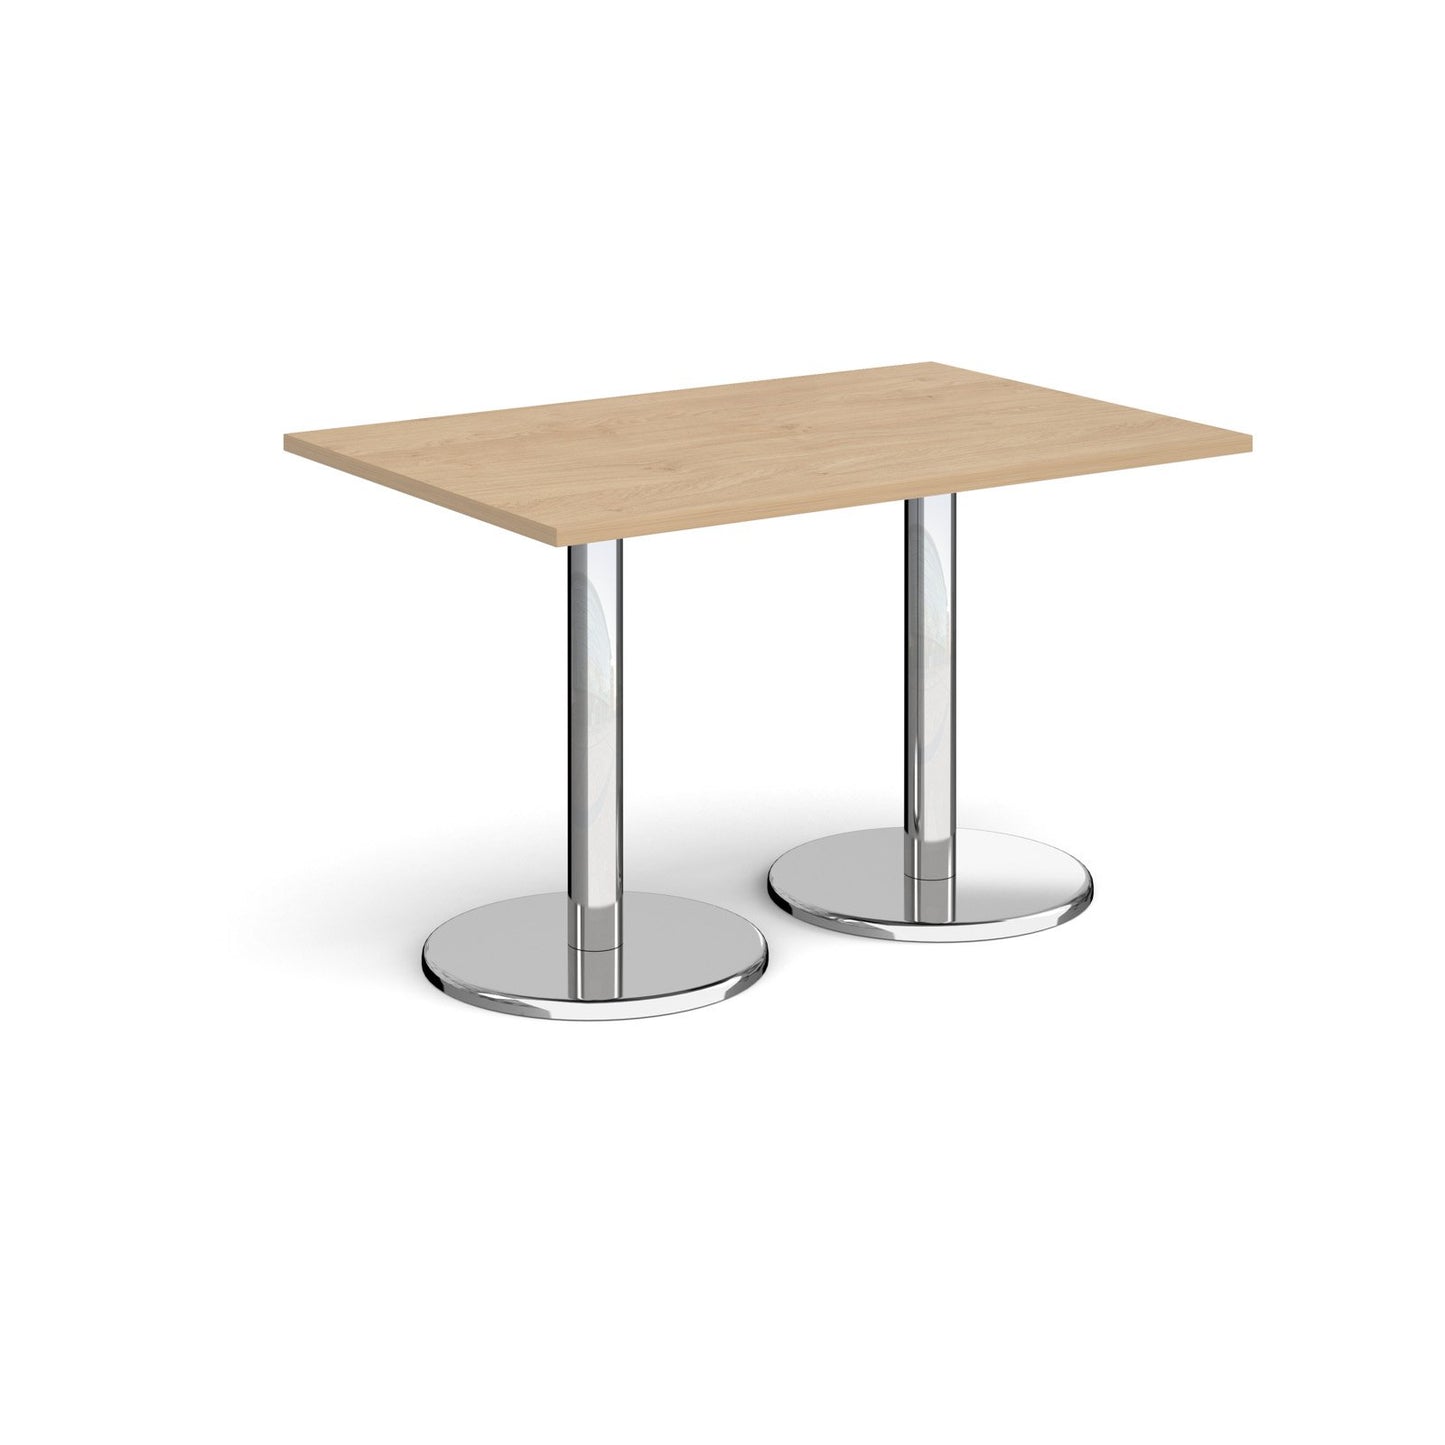 Pisa rectangular dining table with round bases